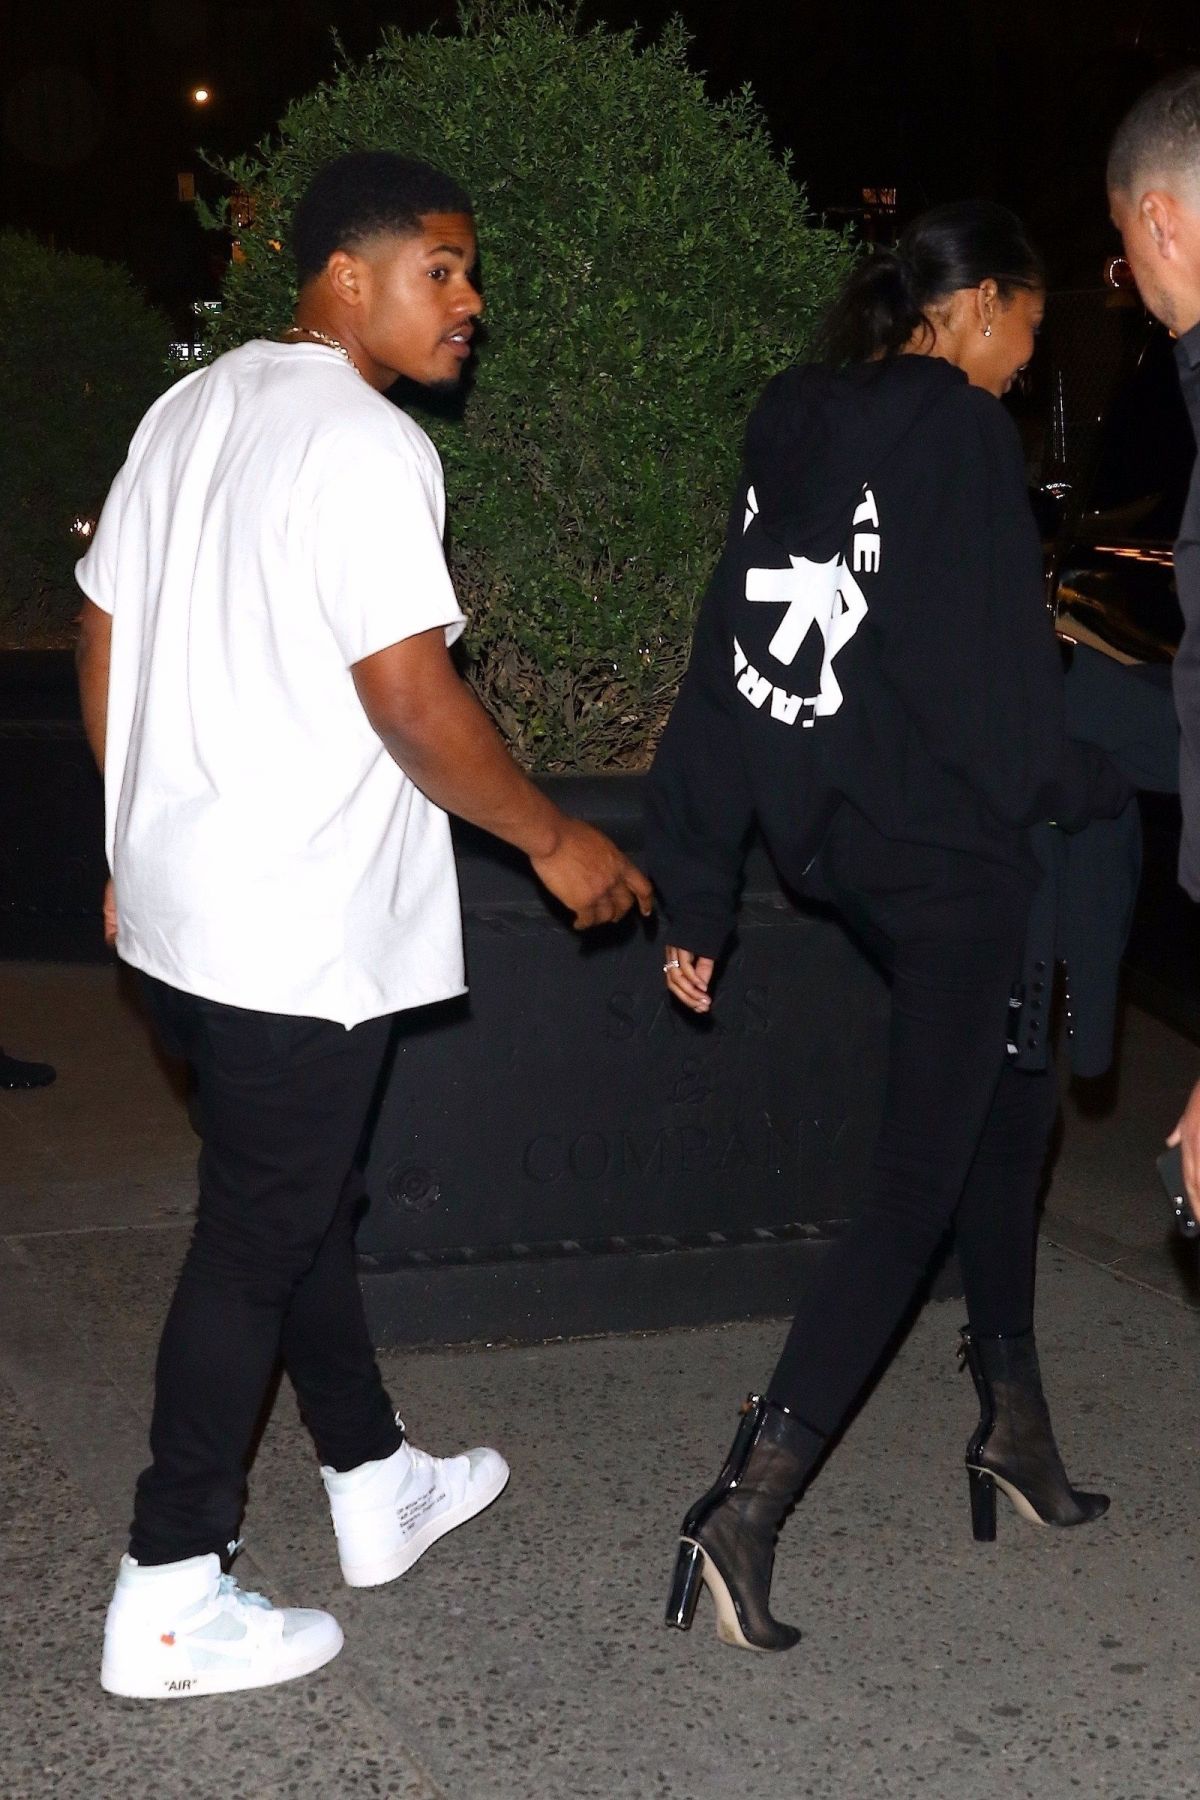 chanel-iman-and-sterling-shepard-at-l-avenue-restaurant-2.jpg